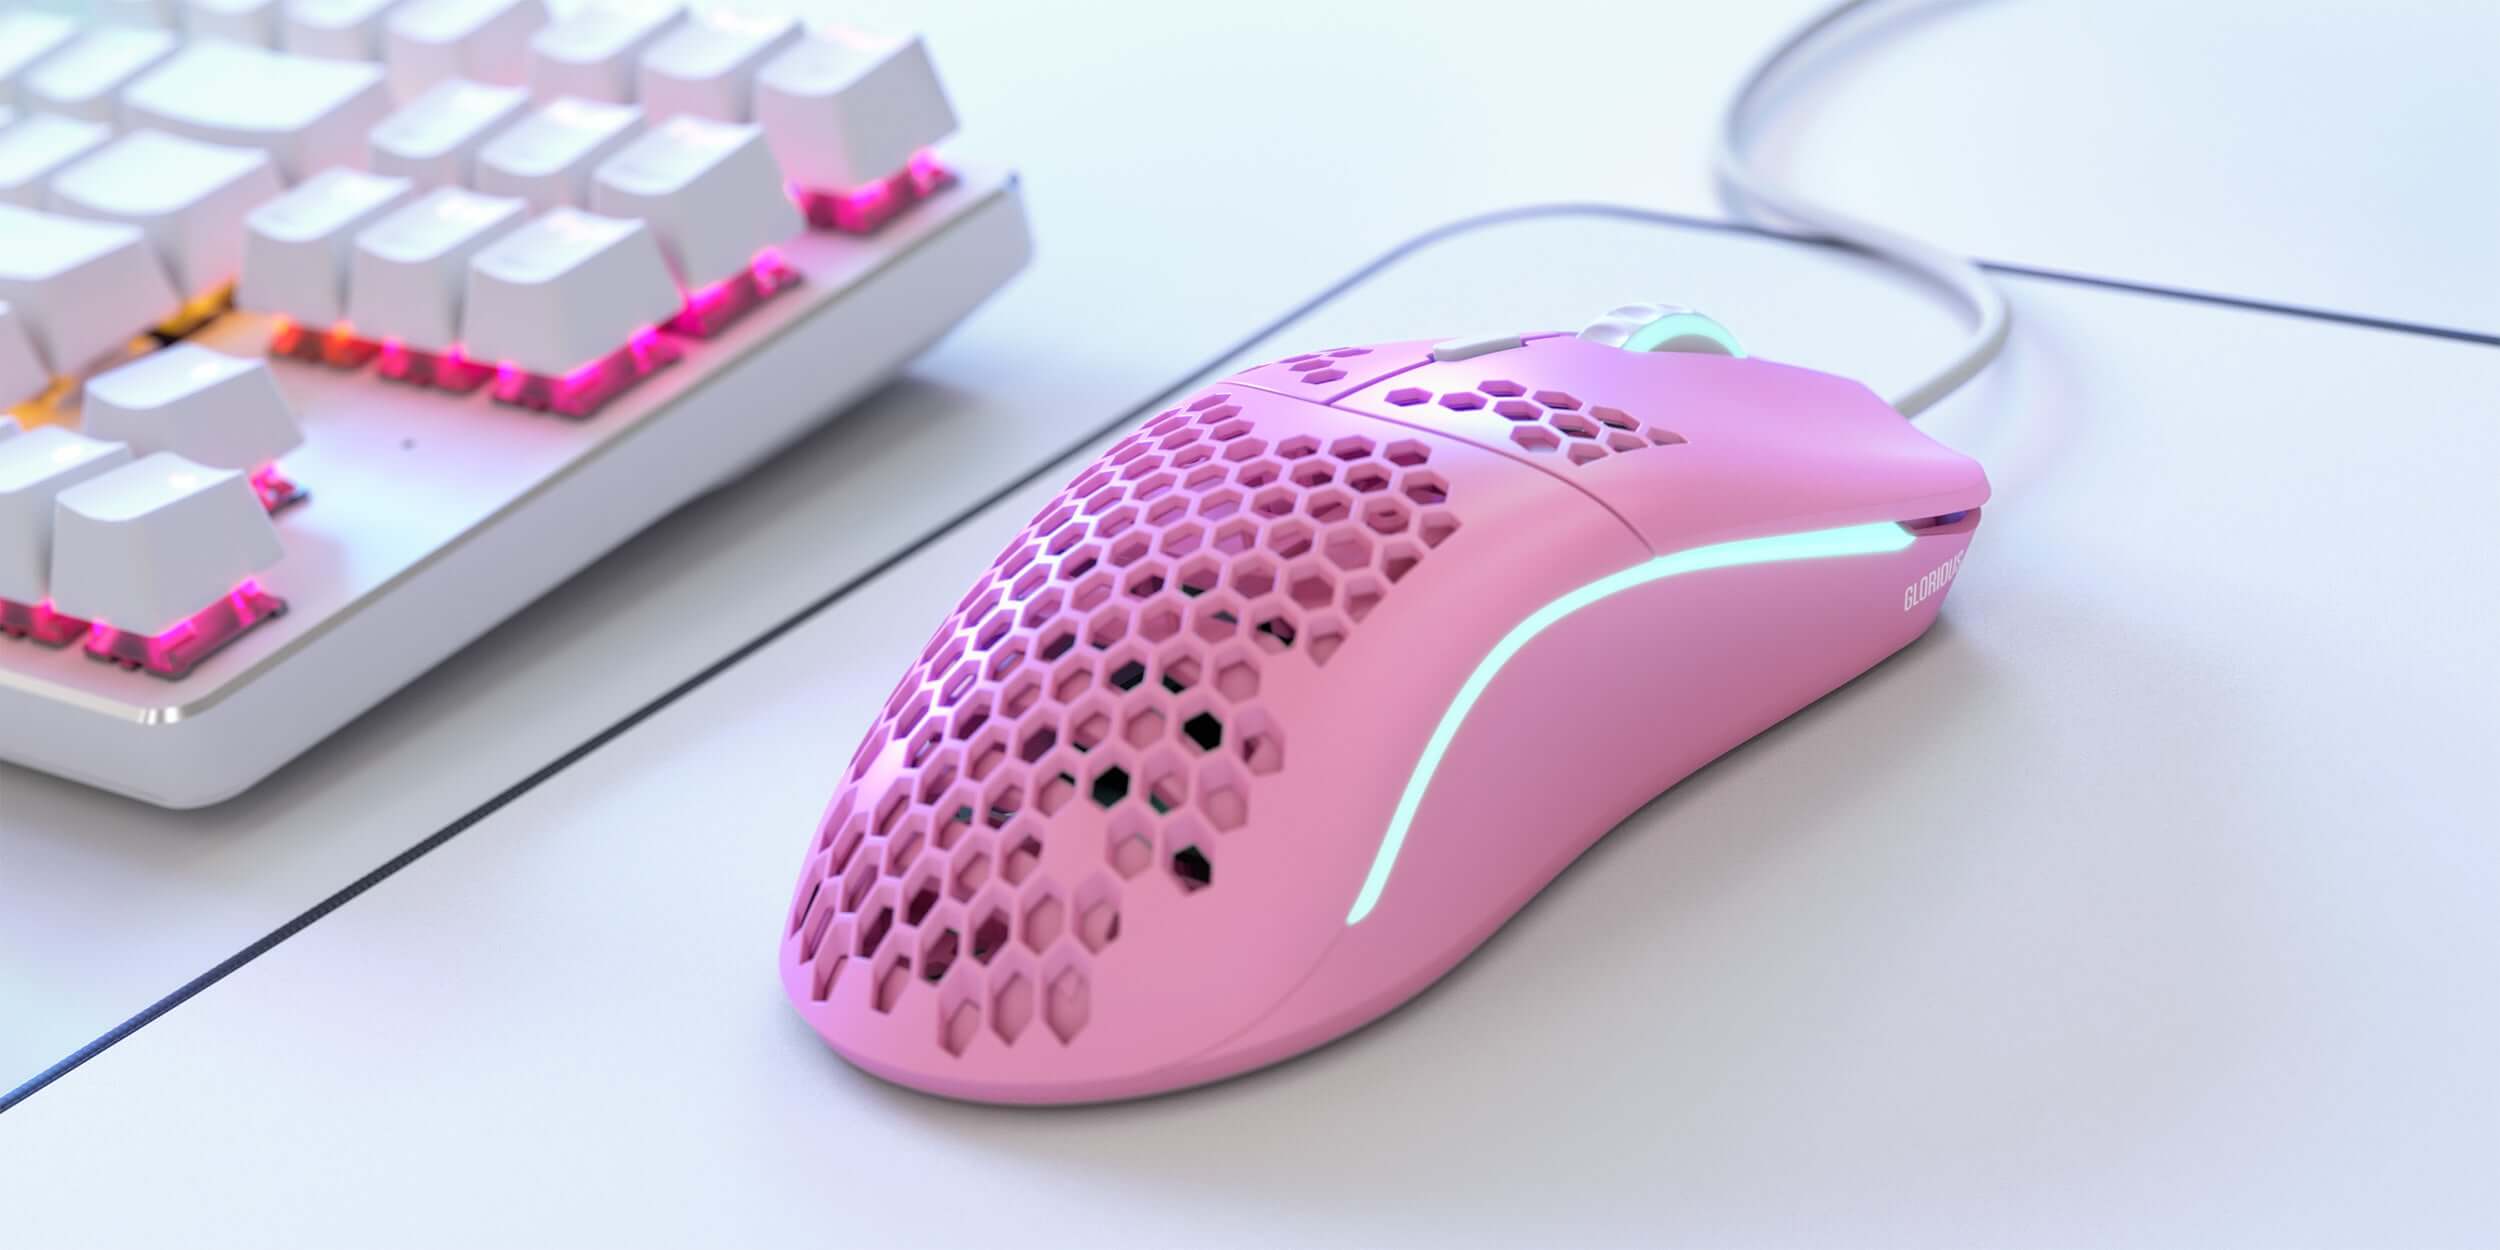 Matte Glorious Pc Gaming Race Model O Gaming Mouse Pink Pc Gaming Accessories Gaming Mice